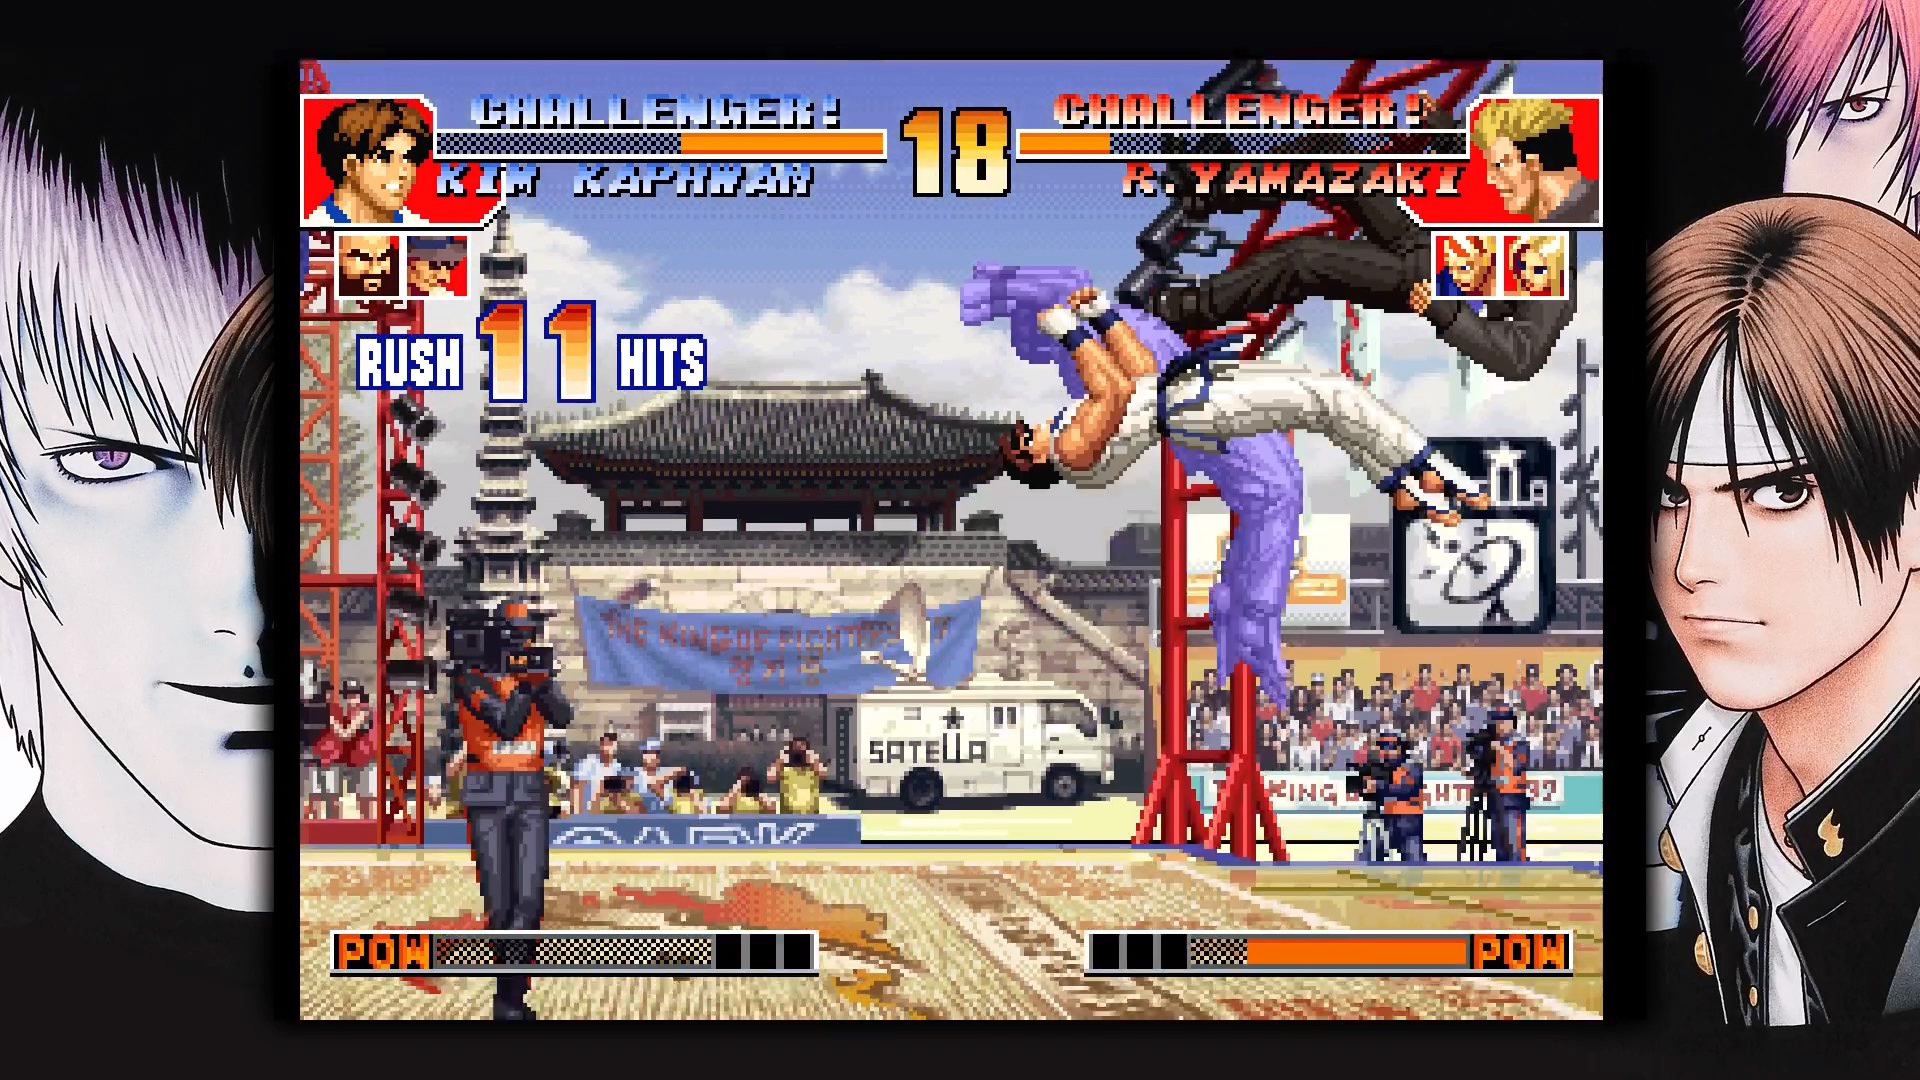 THE KING OF FIGHTERS 97 GLOBAL MATCH Free